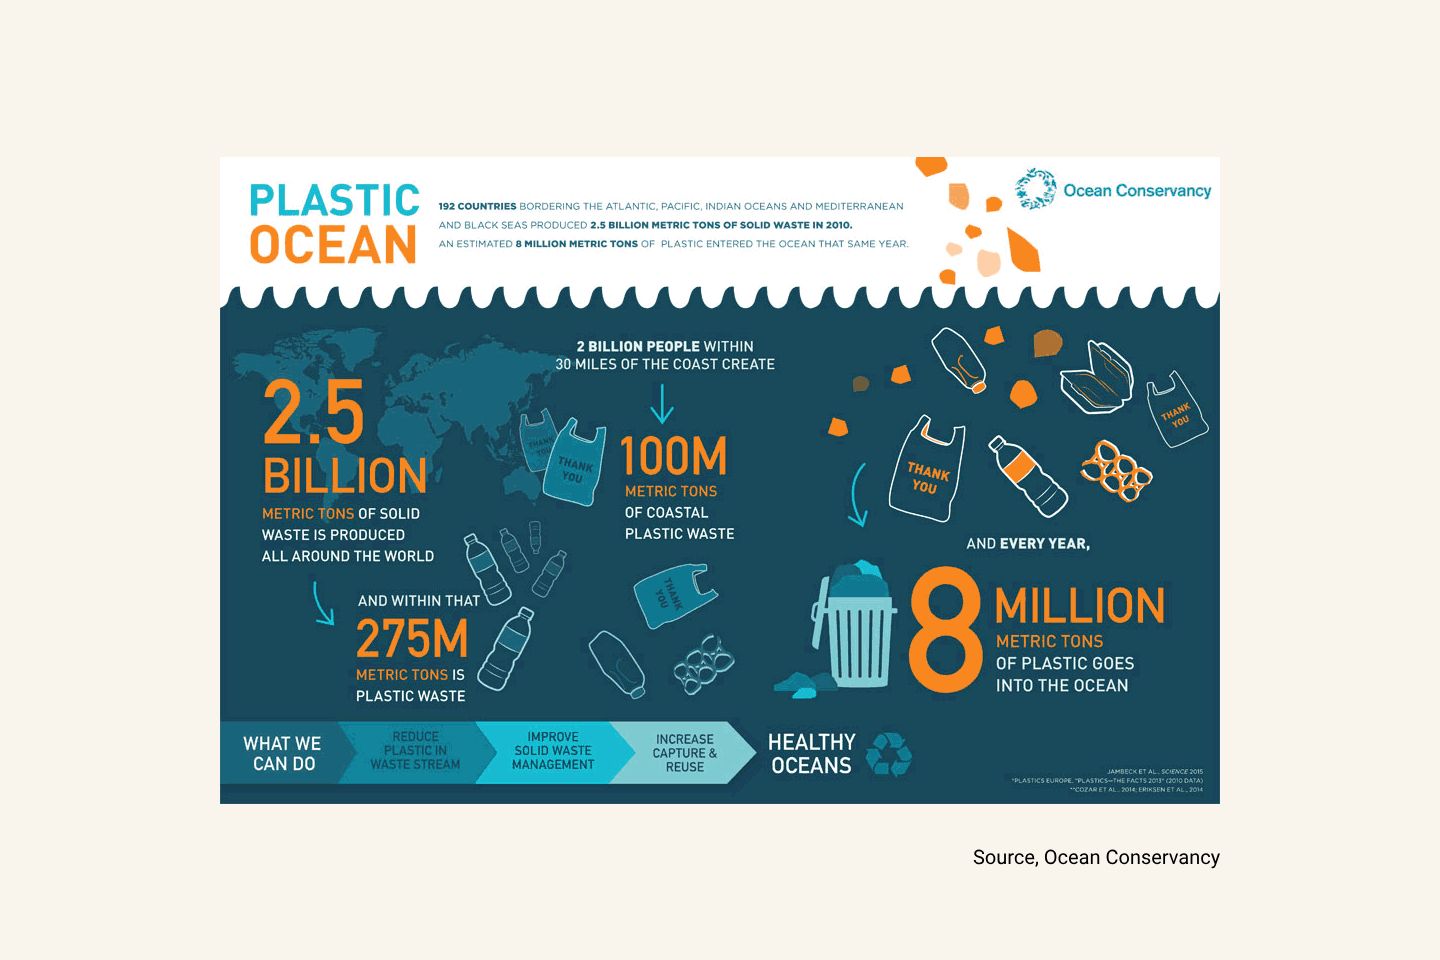 Our oceans are drowning in plastic. Every year, another 11 million tons pile on top of the estimated 200 million tons already swirling around, source - Ocean Conservancy.